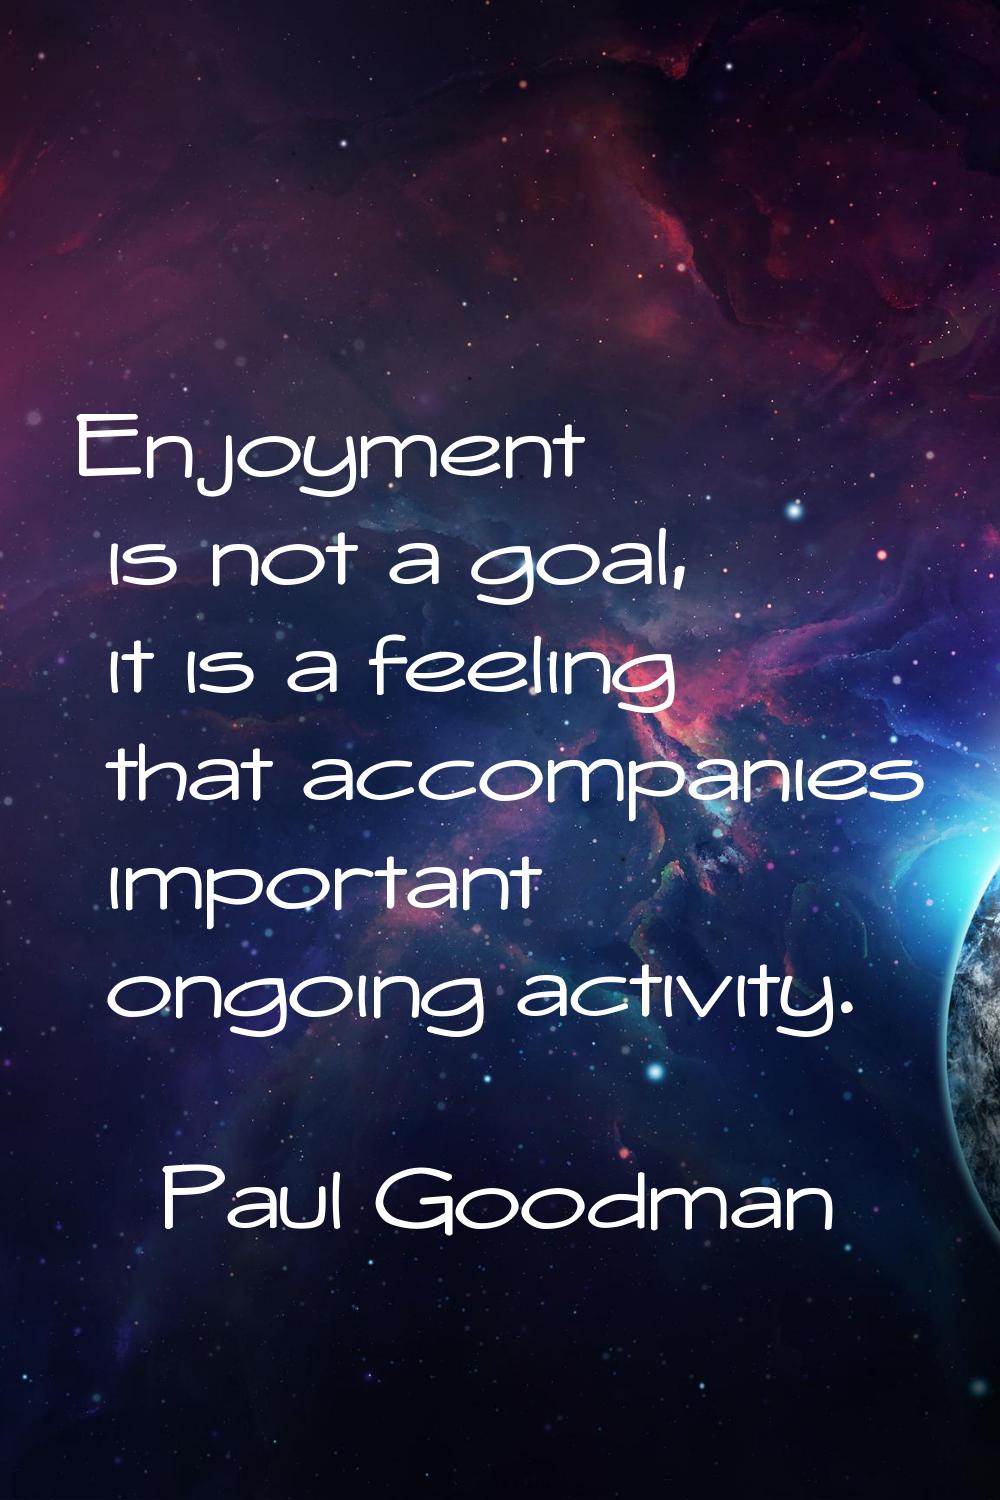 Enjoyment is not a goal, it is a feeling that accompanies important ongoing activity.